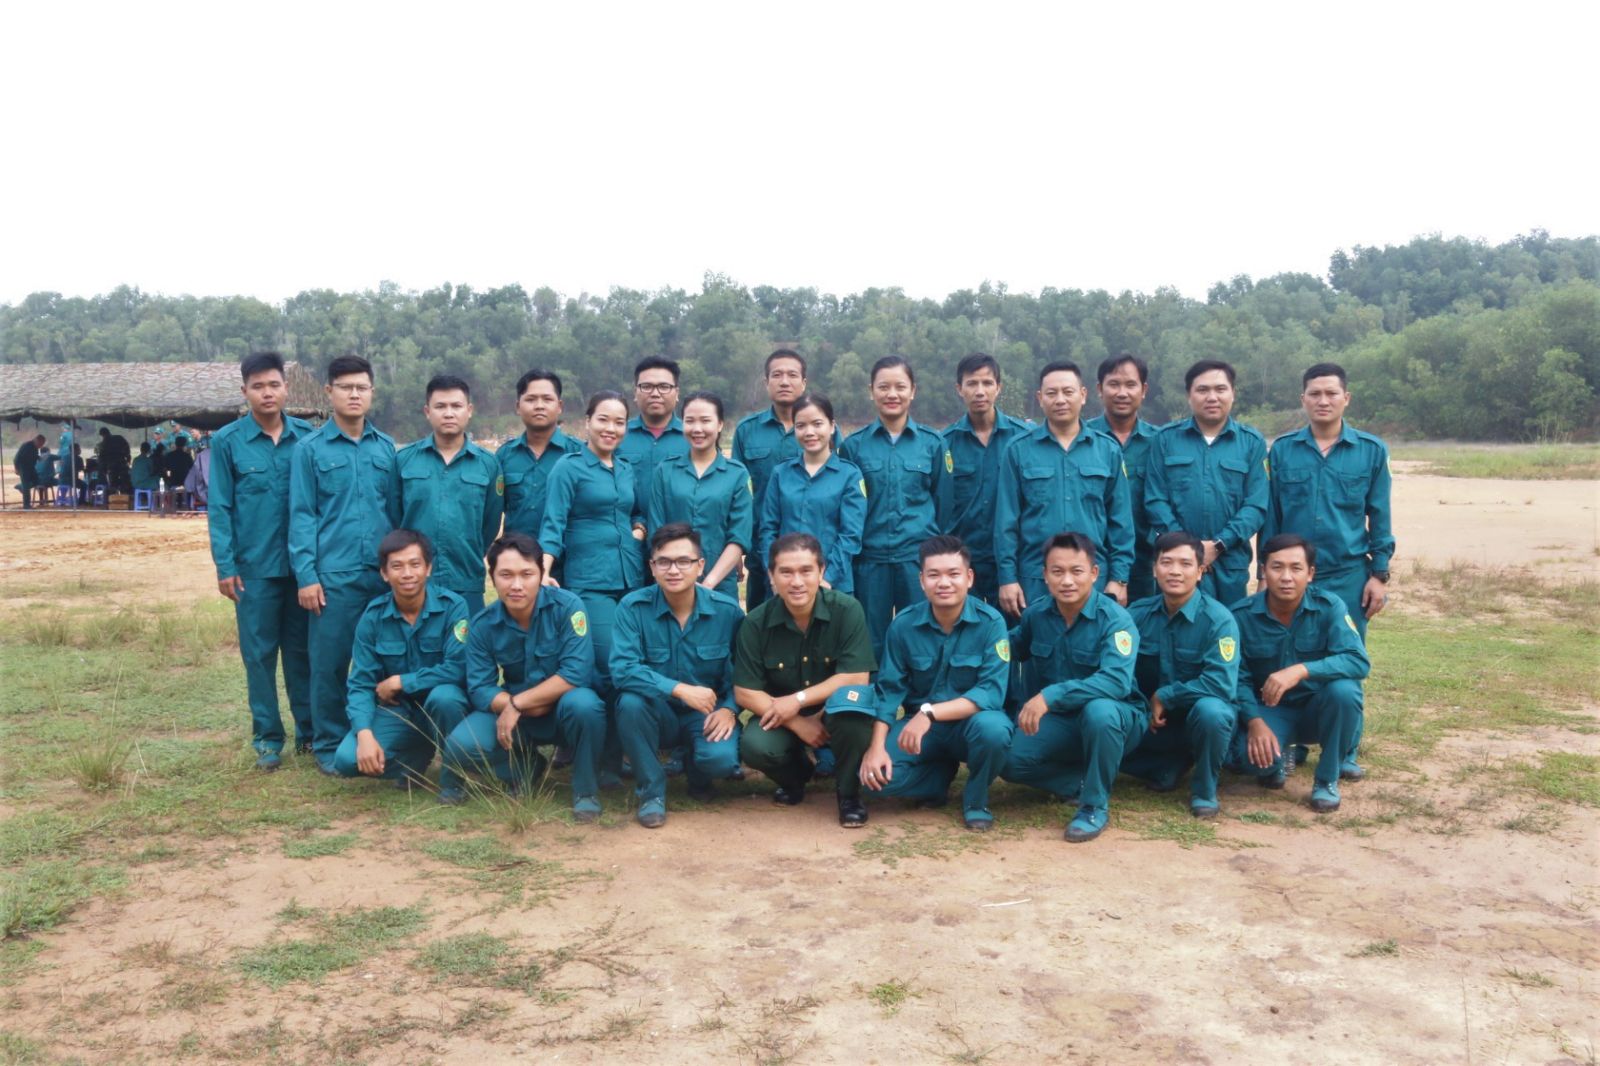 THE MILITARY COMMAND COMMITTEE OF VIAGS TAN SON NHAT ORGANIZED A TRANING COURSE ON REAL-BUTTLETS SHOOTING FOR SELF-DEFENSE FORCE